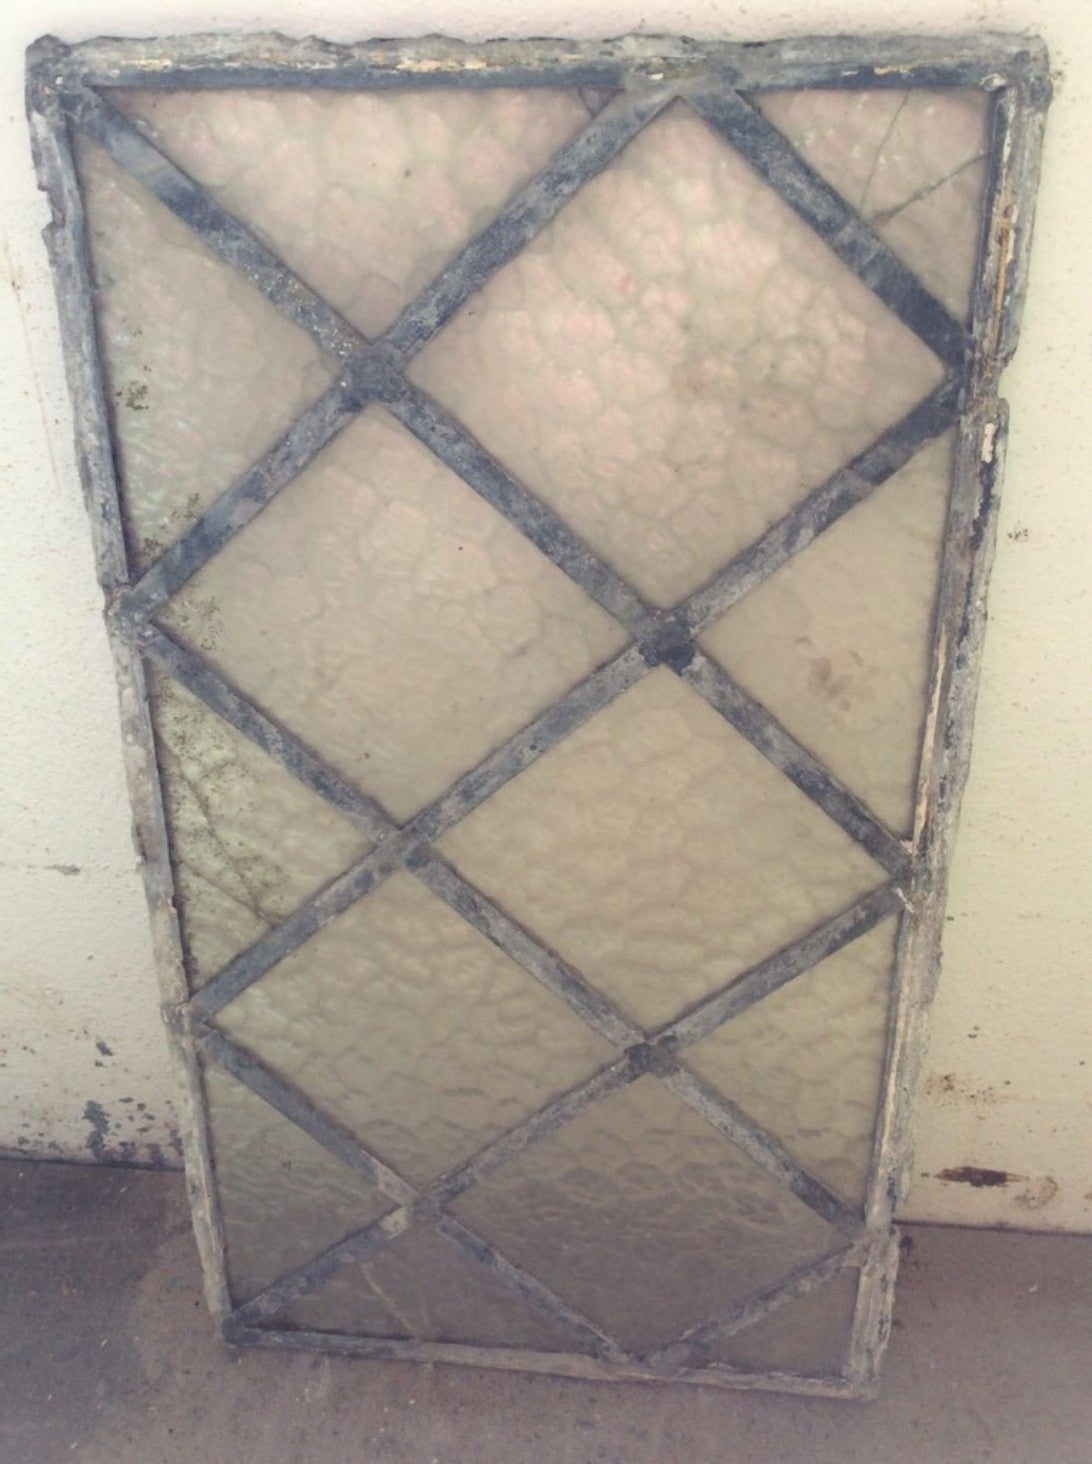 39.7cm By 22.5cm Salvaged Old Antique Translucent Glass Leaded Window 14 Panes